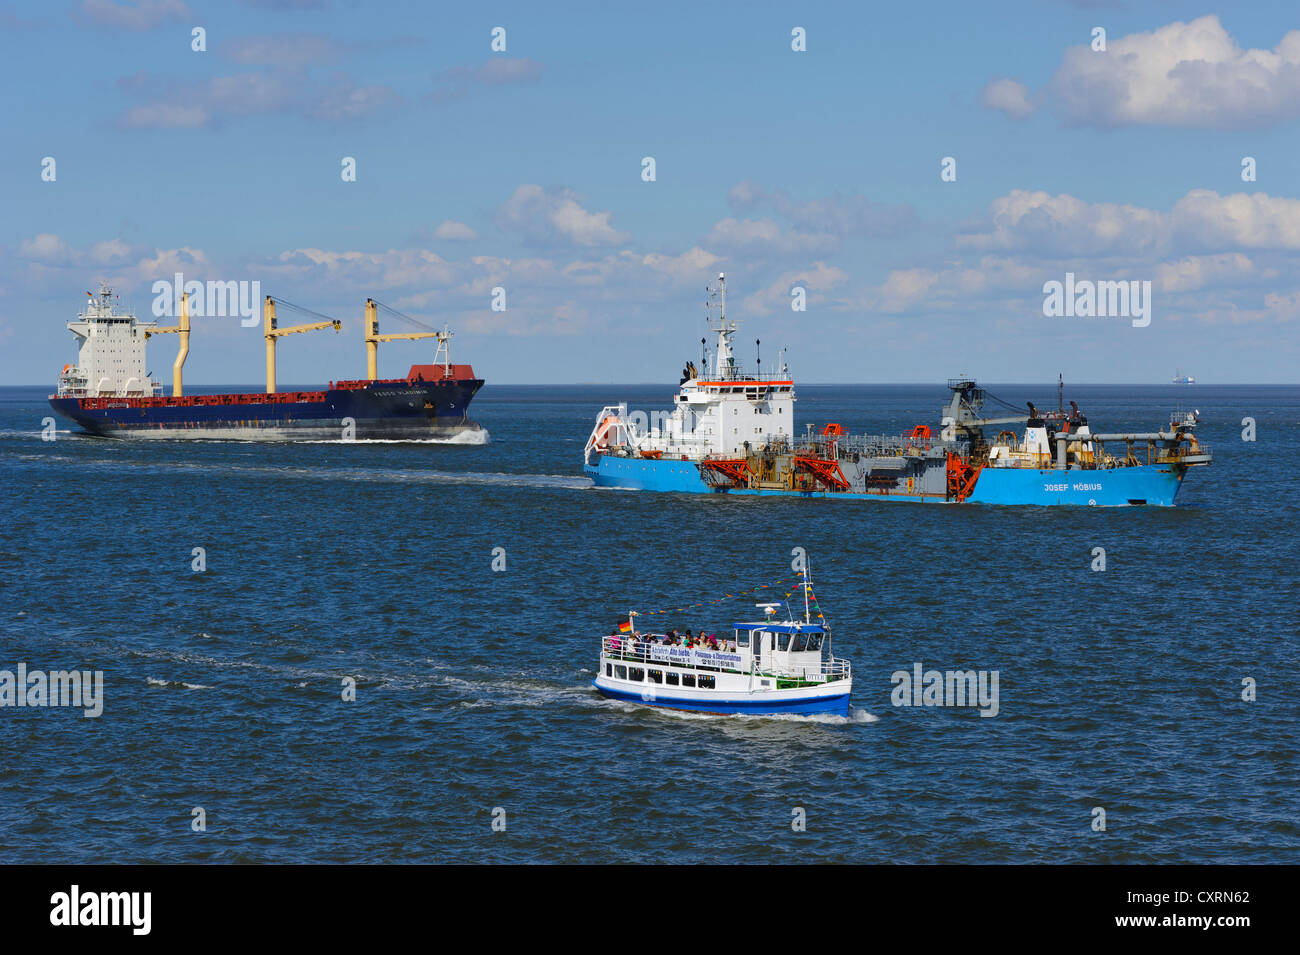 A Container vessel, a suction dredger and a launch passing Cuxhaven, Lower Saxony, Germany, Europe, PublicGround Stock Photo